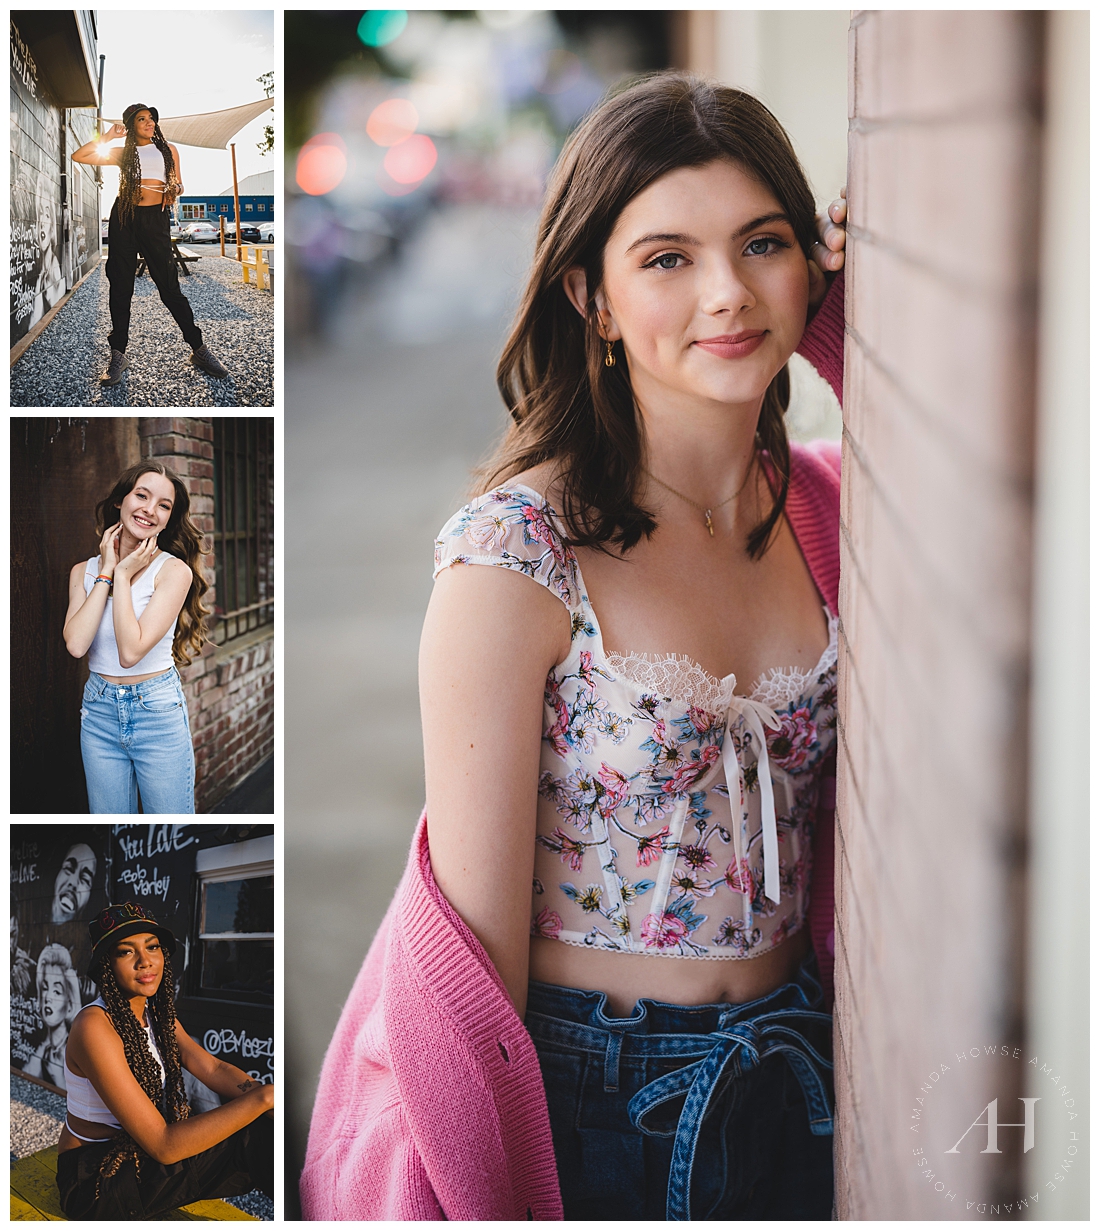 Senior Portraits with Awesome Textured Backgrounds | Top Locations For Senior Portraits in Seattle-Tacoma Area | Photographed by the Best Tacoma Senior Portrait Photographer Amanda Howse